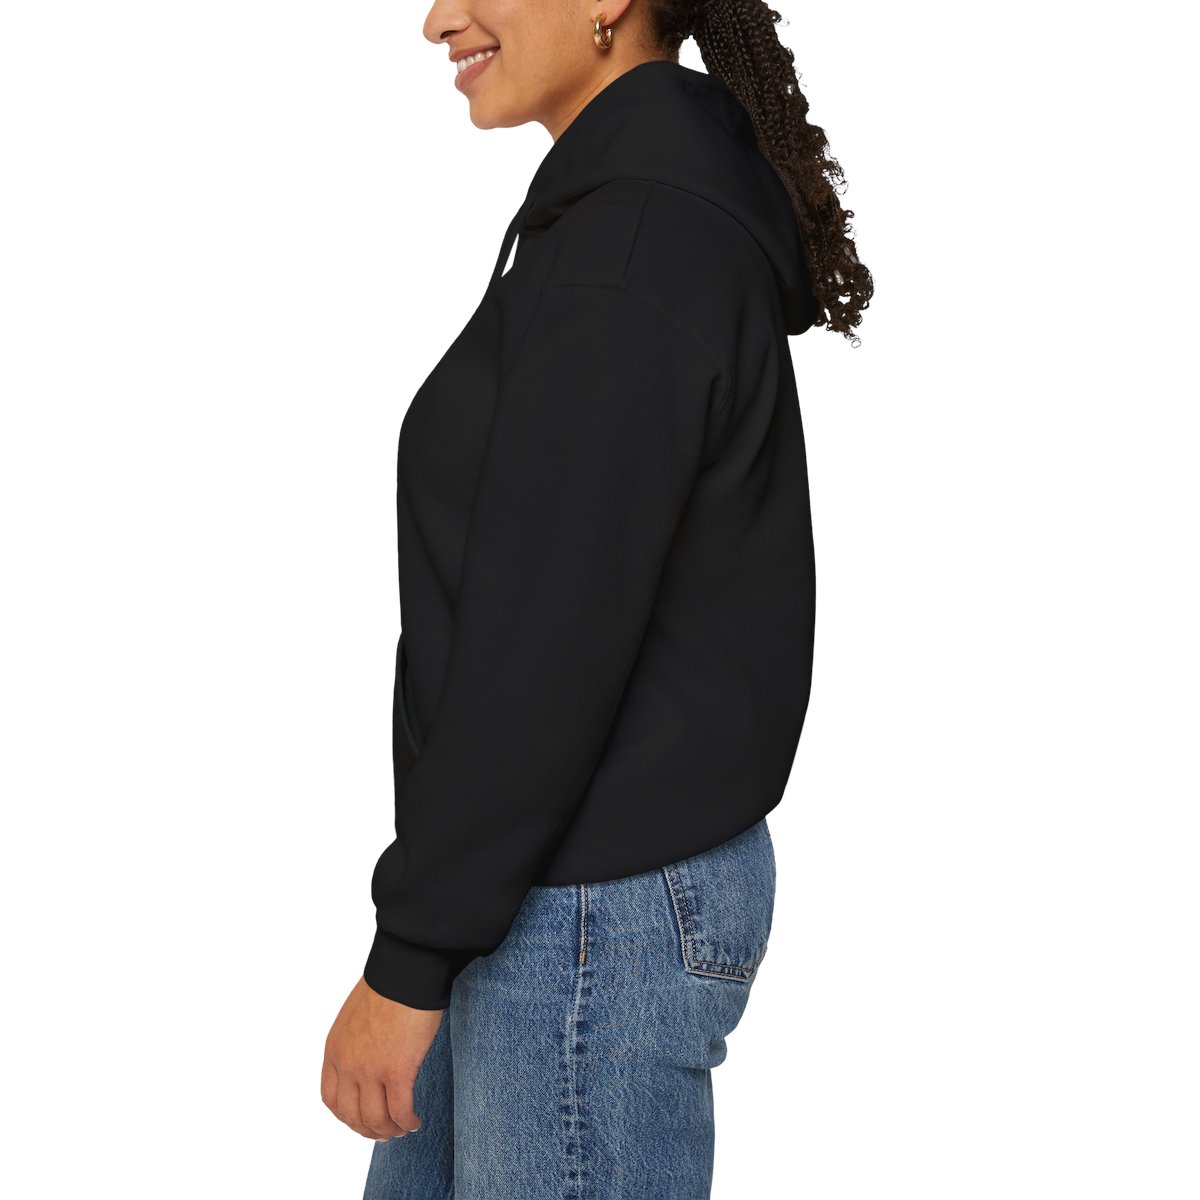 Encourage the world to be kind to each other in the comfy unisex Heavy Blend™ Hooded Sweatshirt product thumbnail image